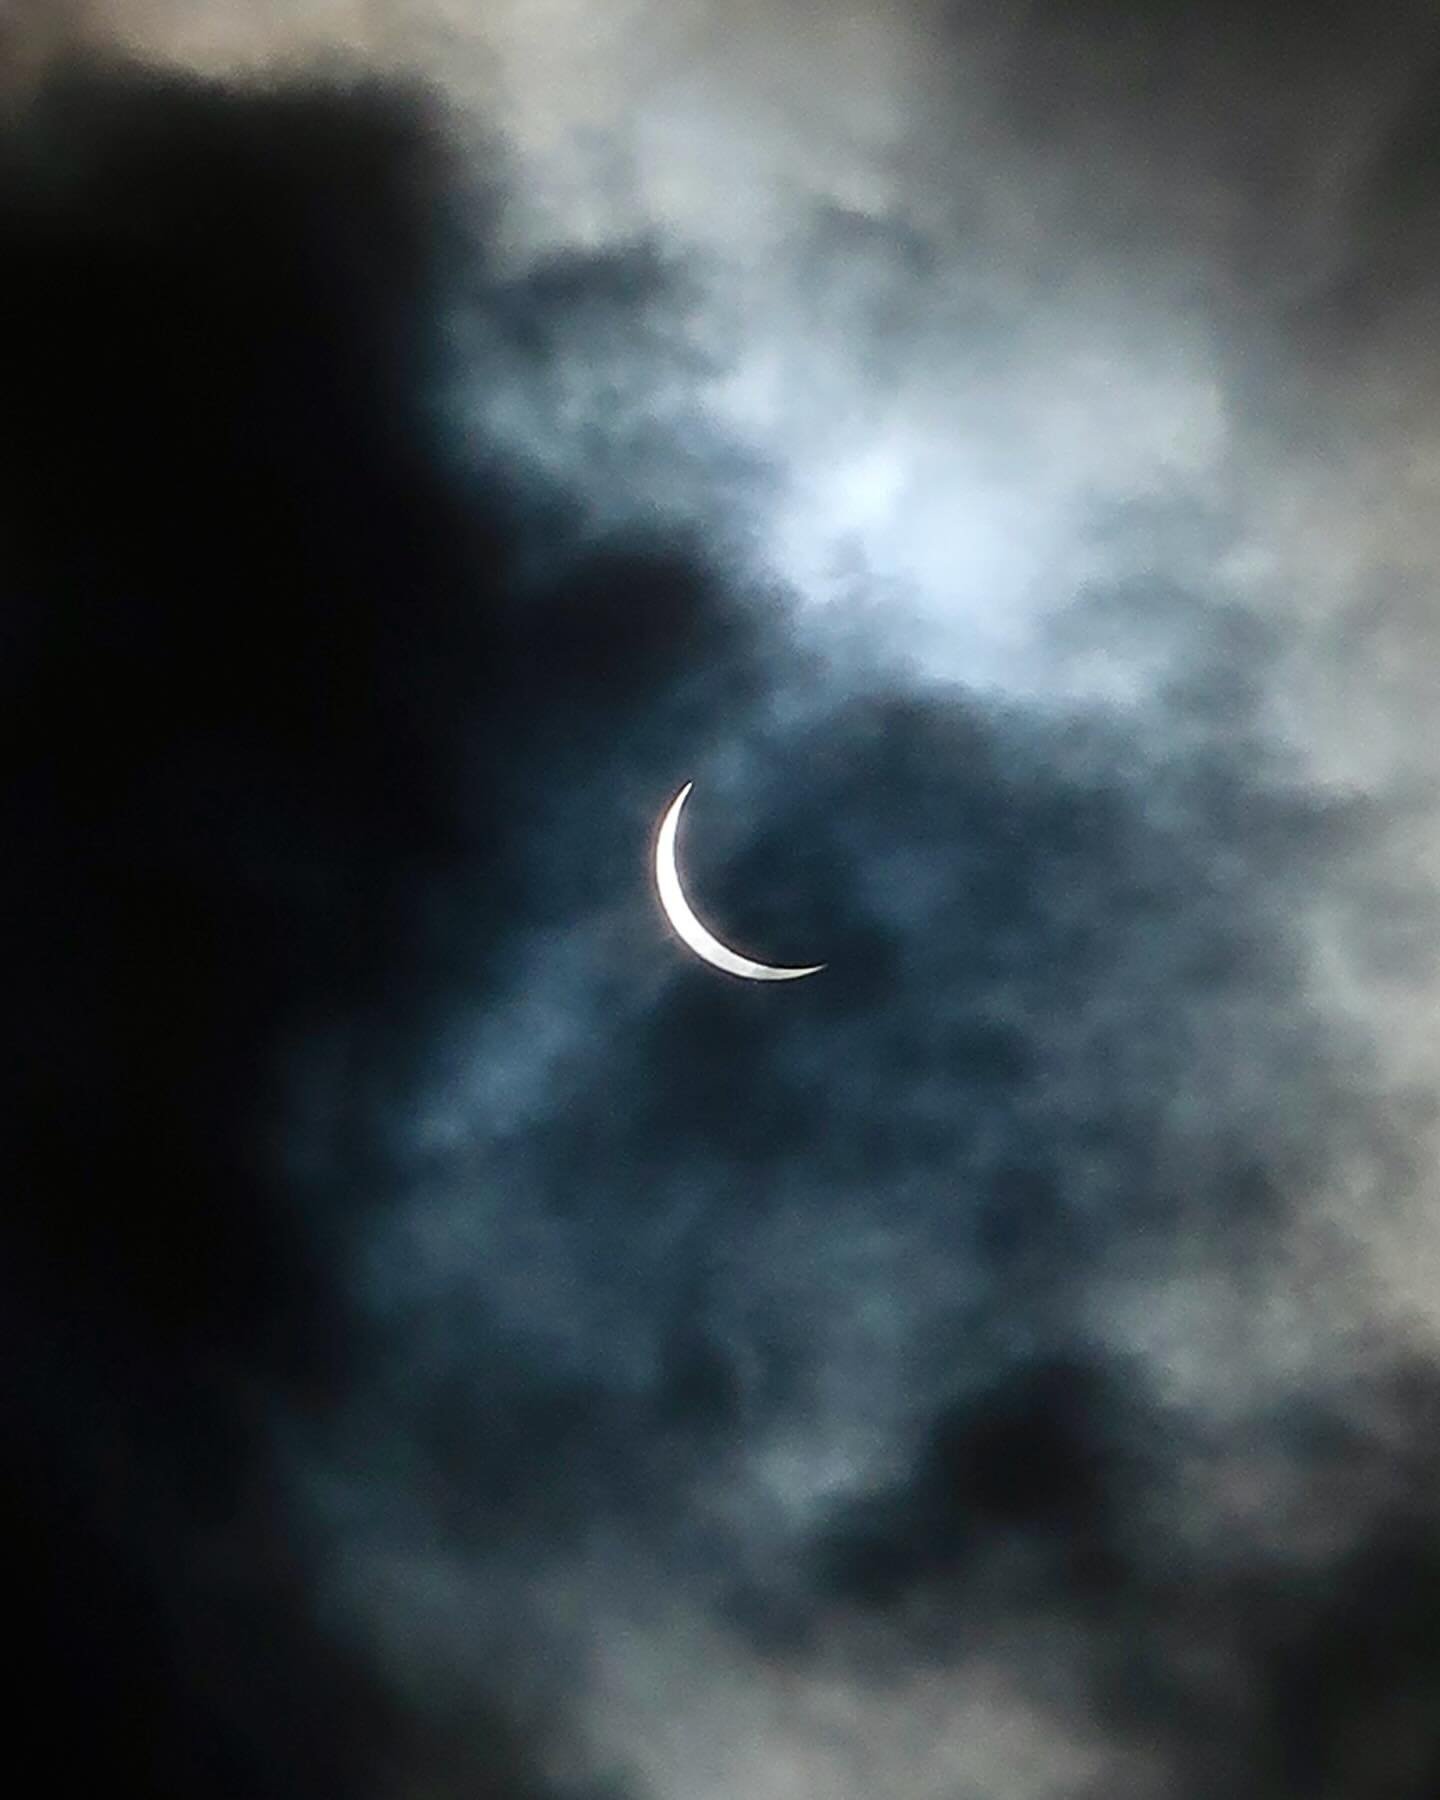 today&rsquo;s solar eclipse (it&rsquo;s giving halloween in april) 🌘 captured on my point and shoot with the exposure setting turned all the way down (just like I did for that blue supermoon in august) 😅 - I didn&rsquo;t have the special glasses, b